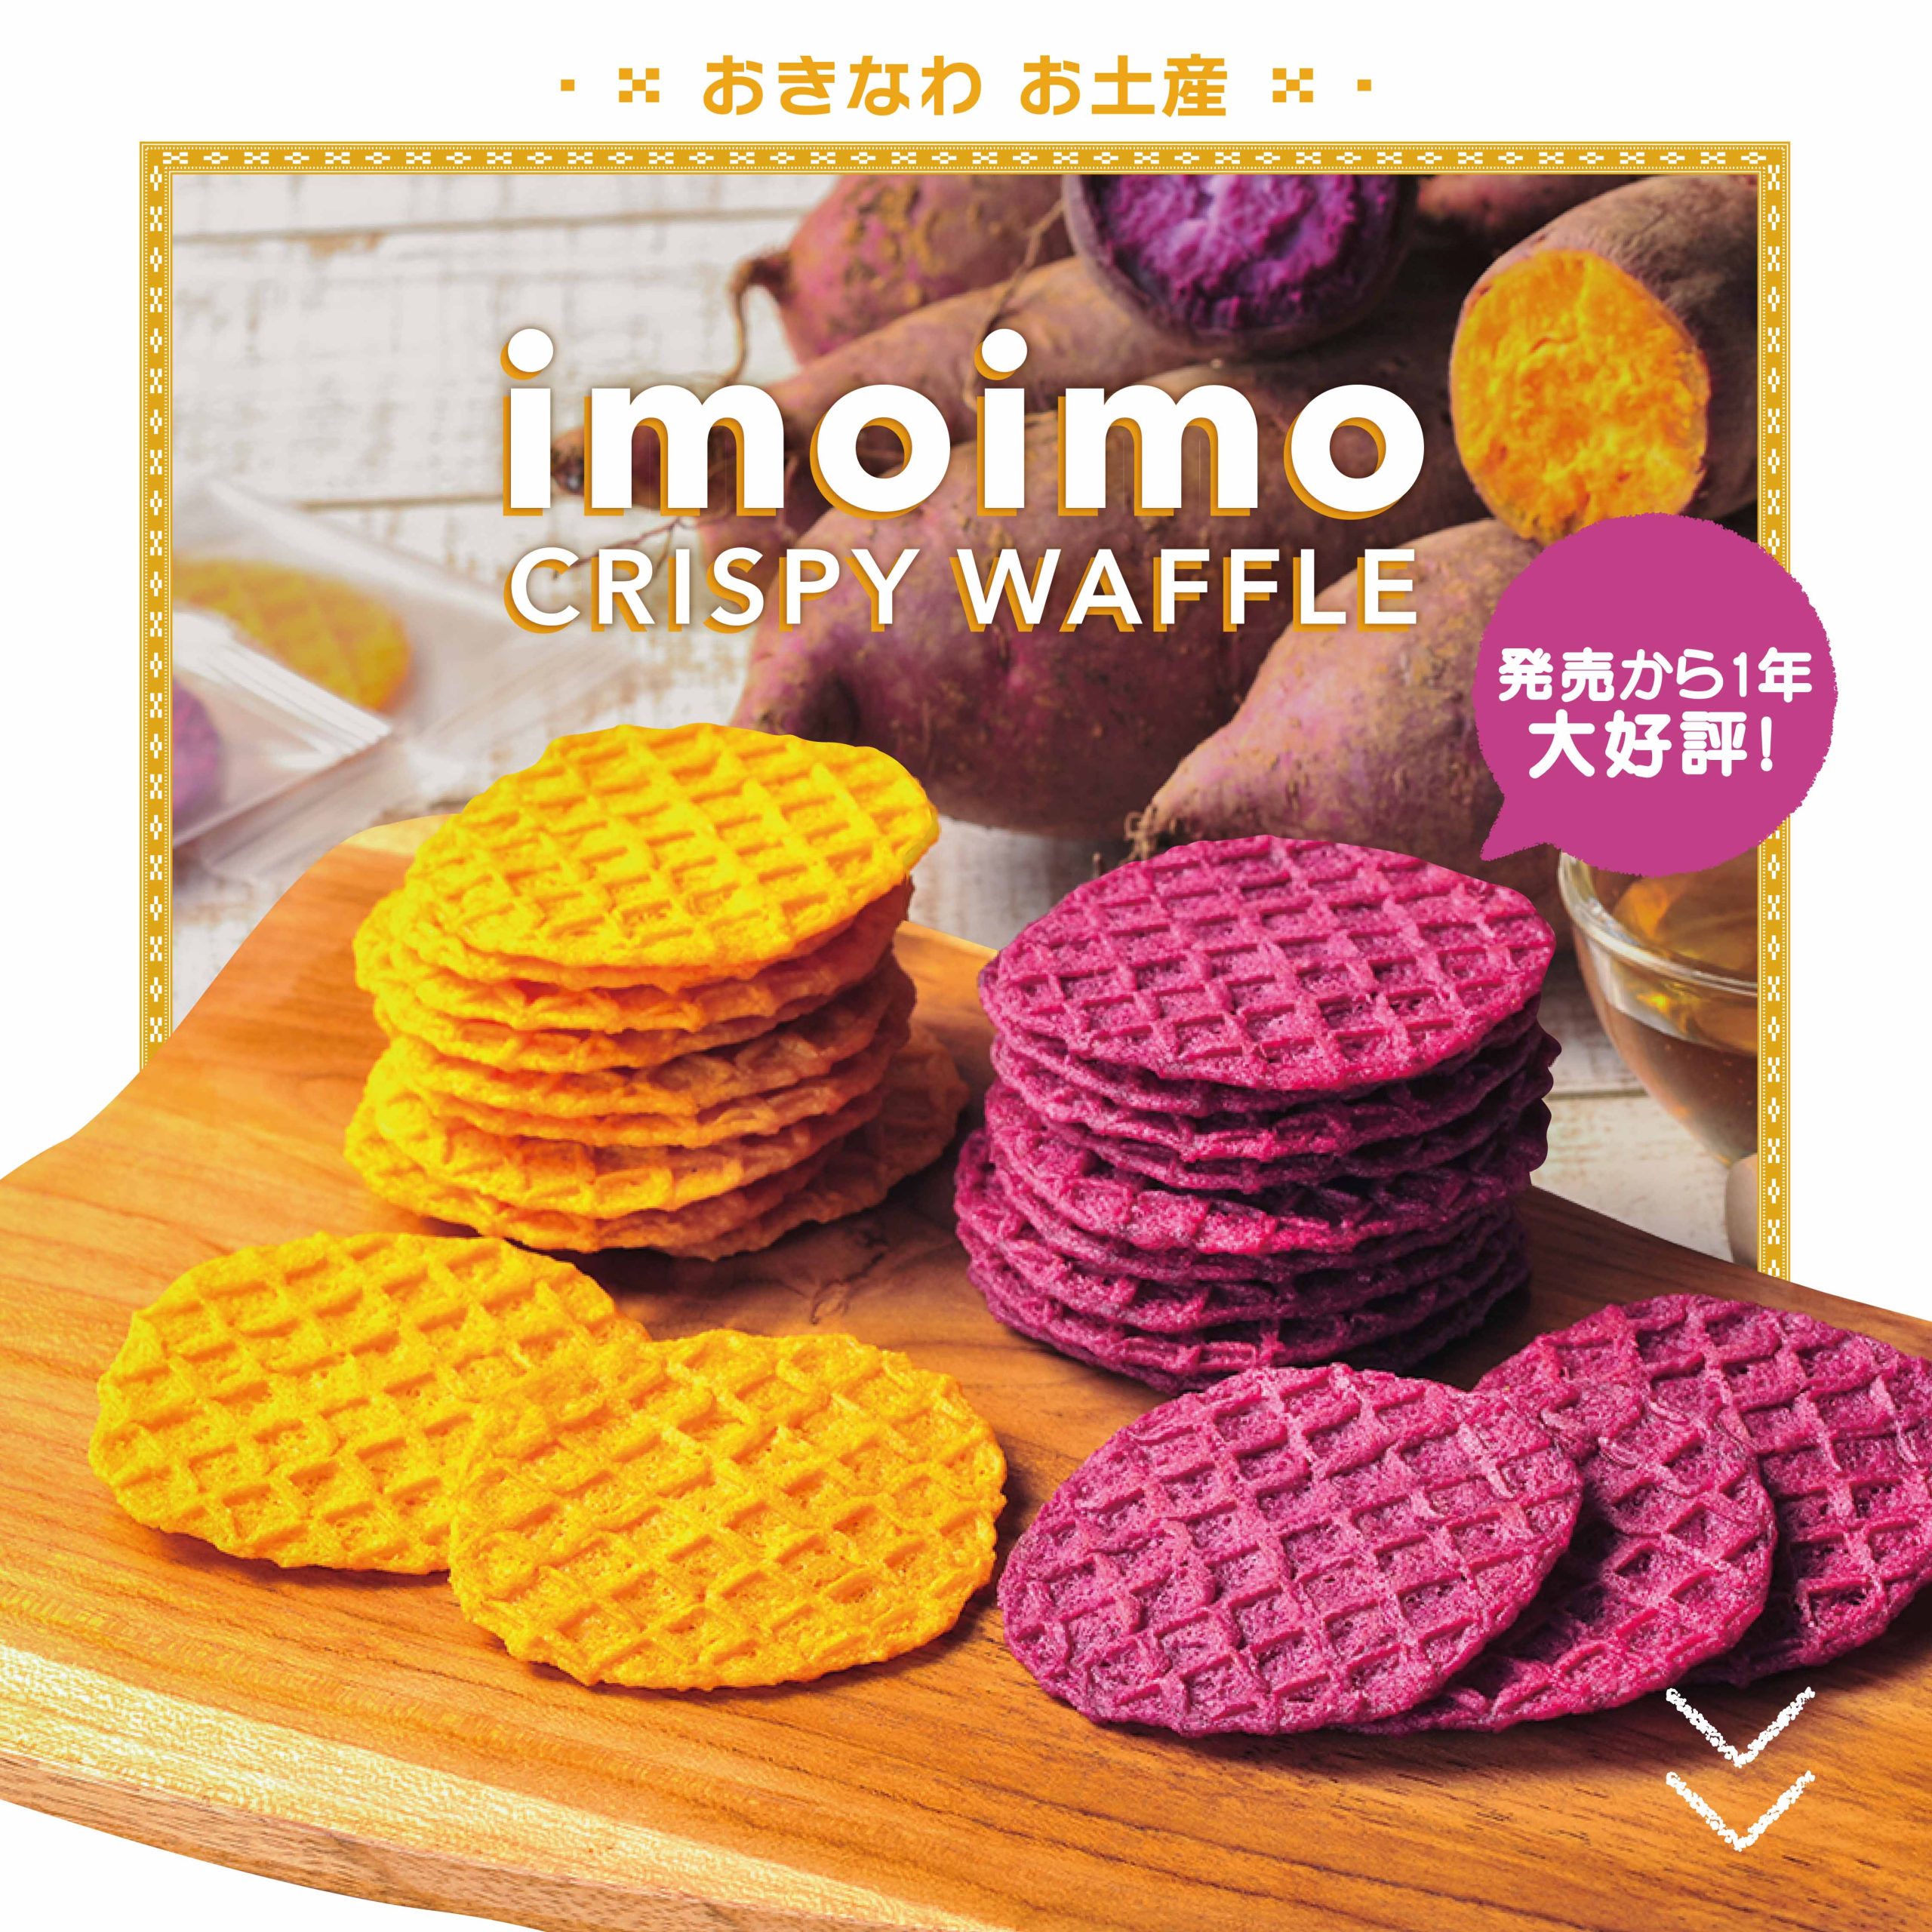 One year has passed since the release of Potato Crispy Waffles!